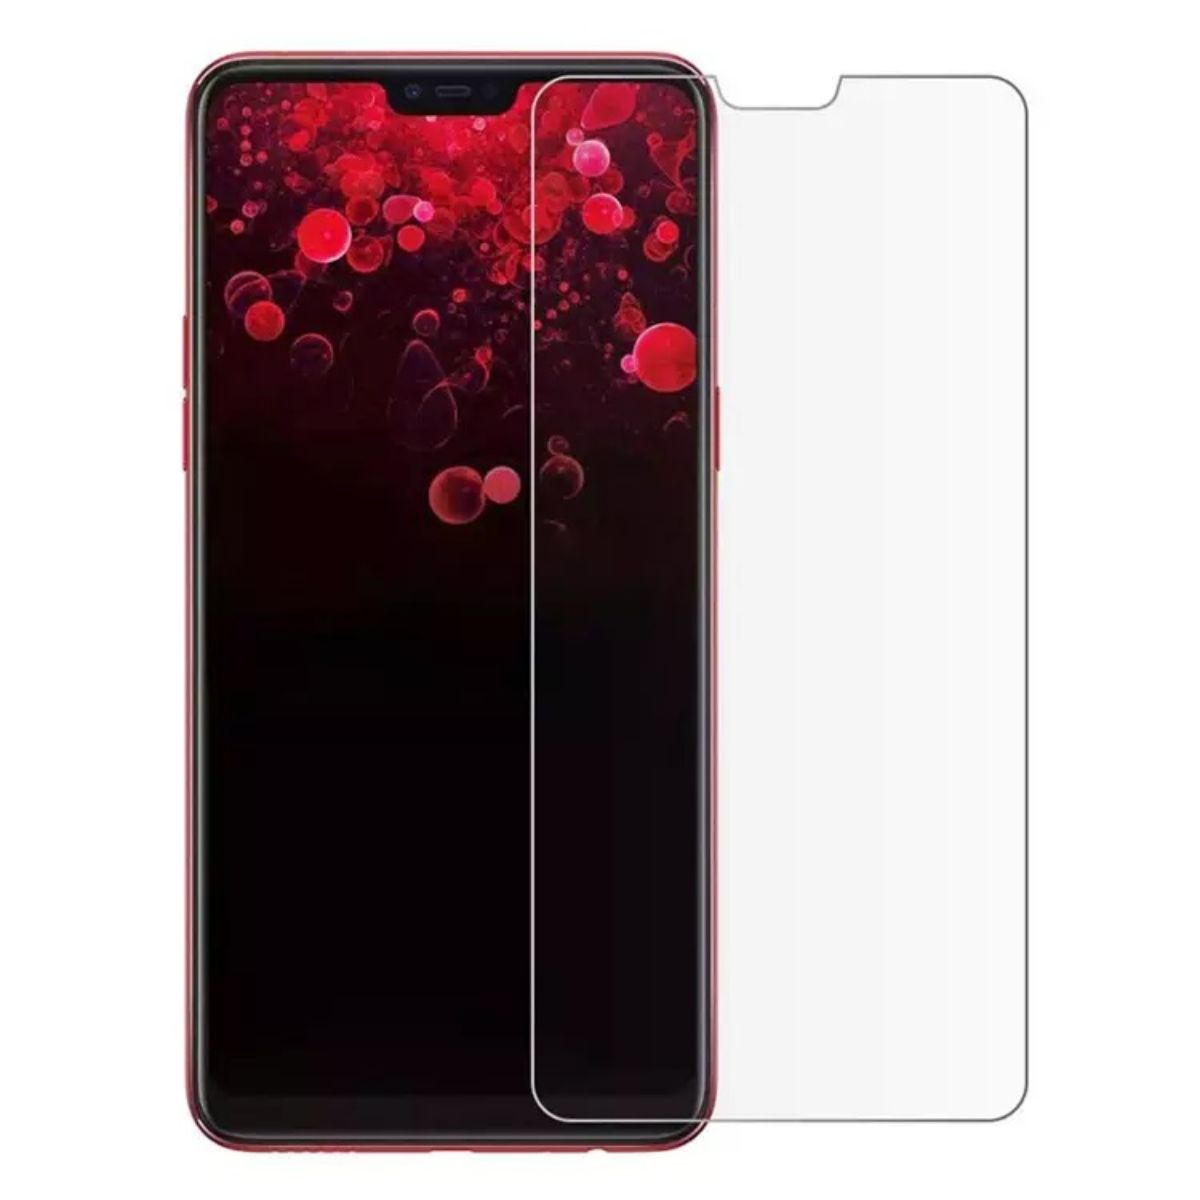 OPPO F7 YOUTH 1